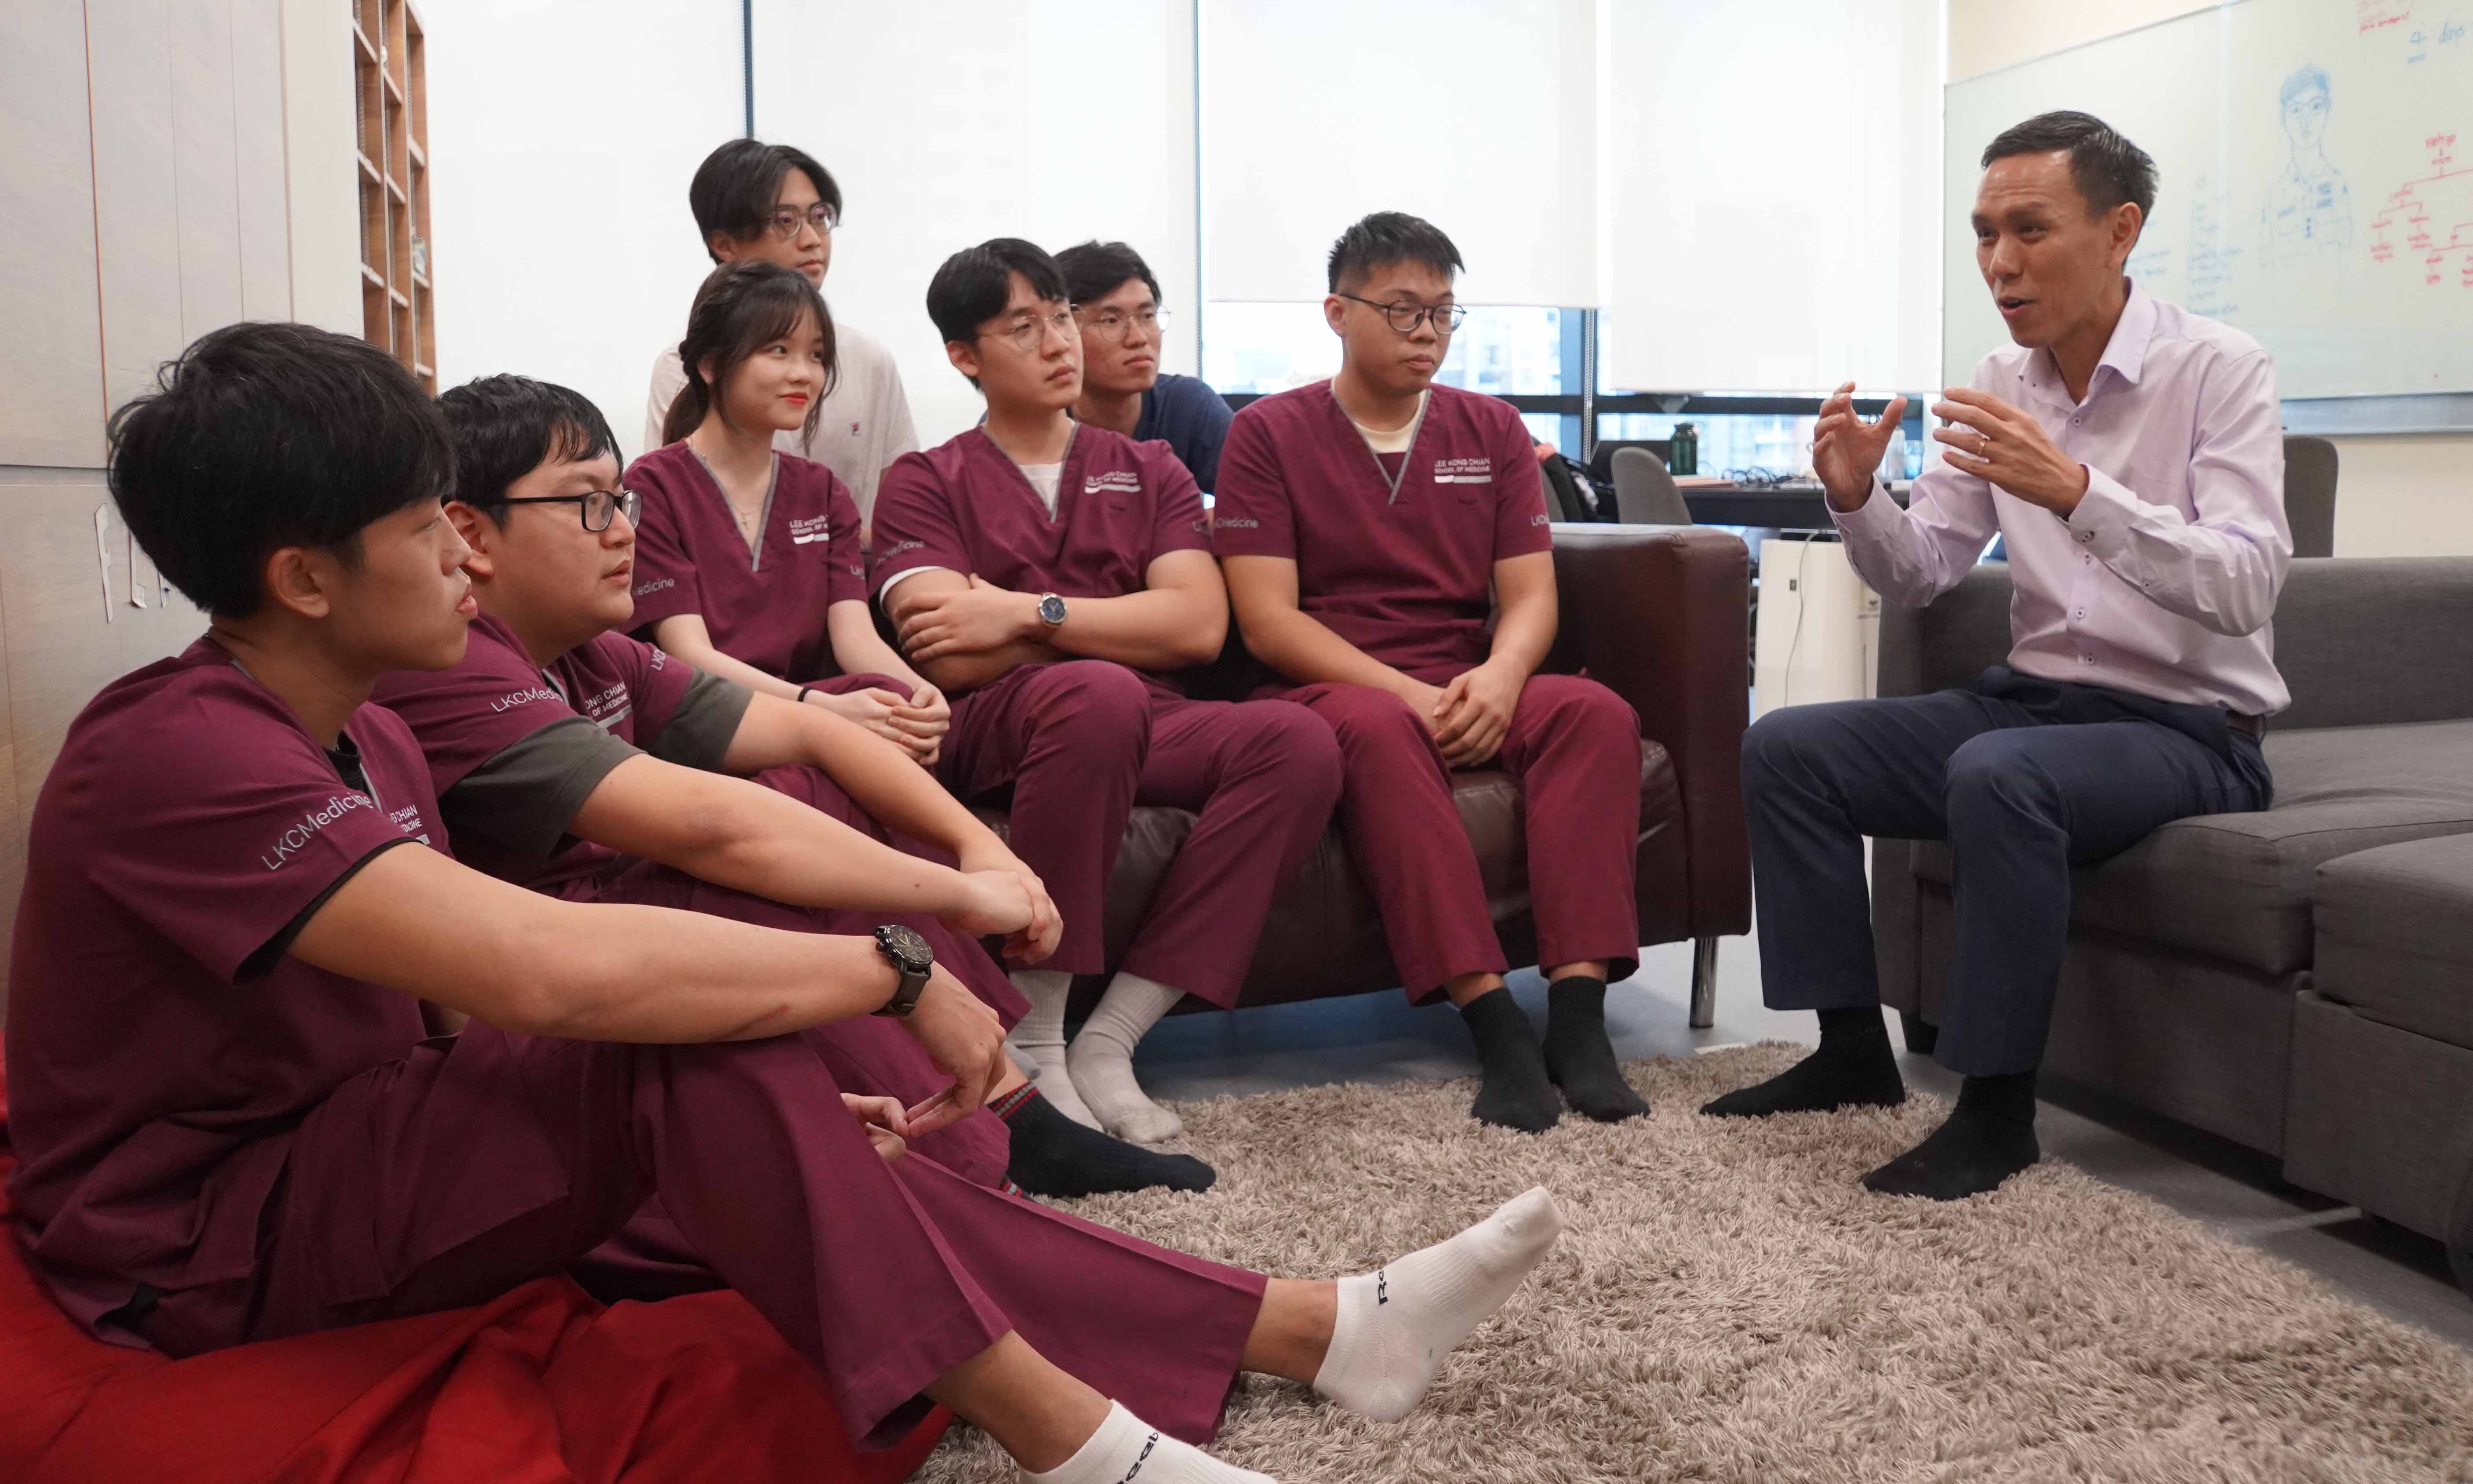 NTU LKCMedicine Assistant Dean of Student Well-being Emmanuel Tan (right) having a discussion with LKCMedicine students.